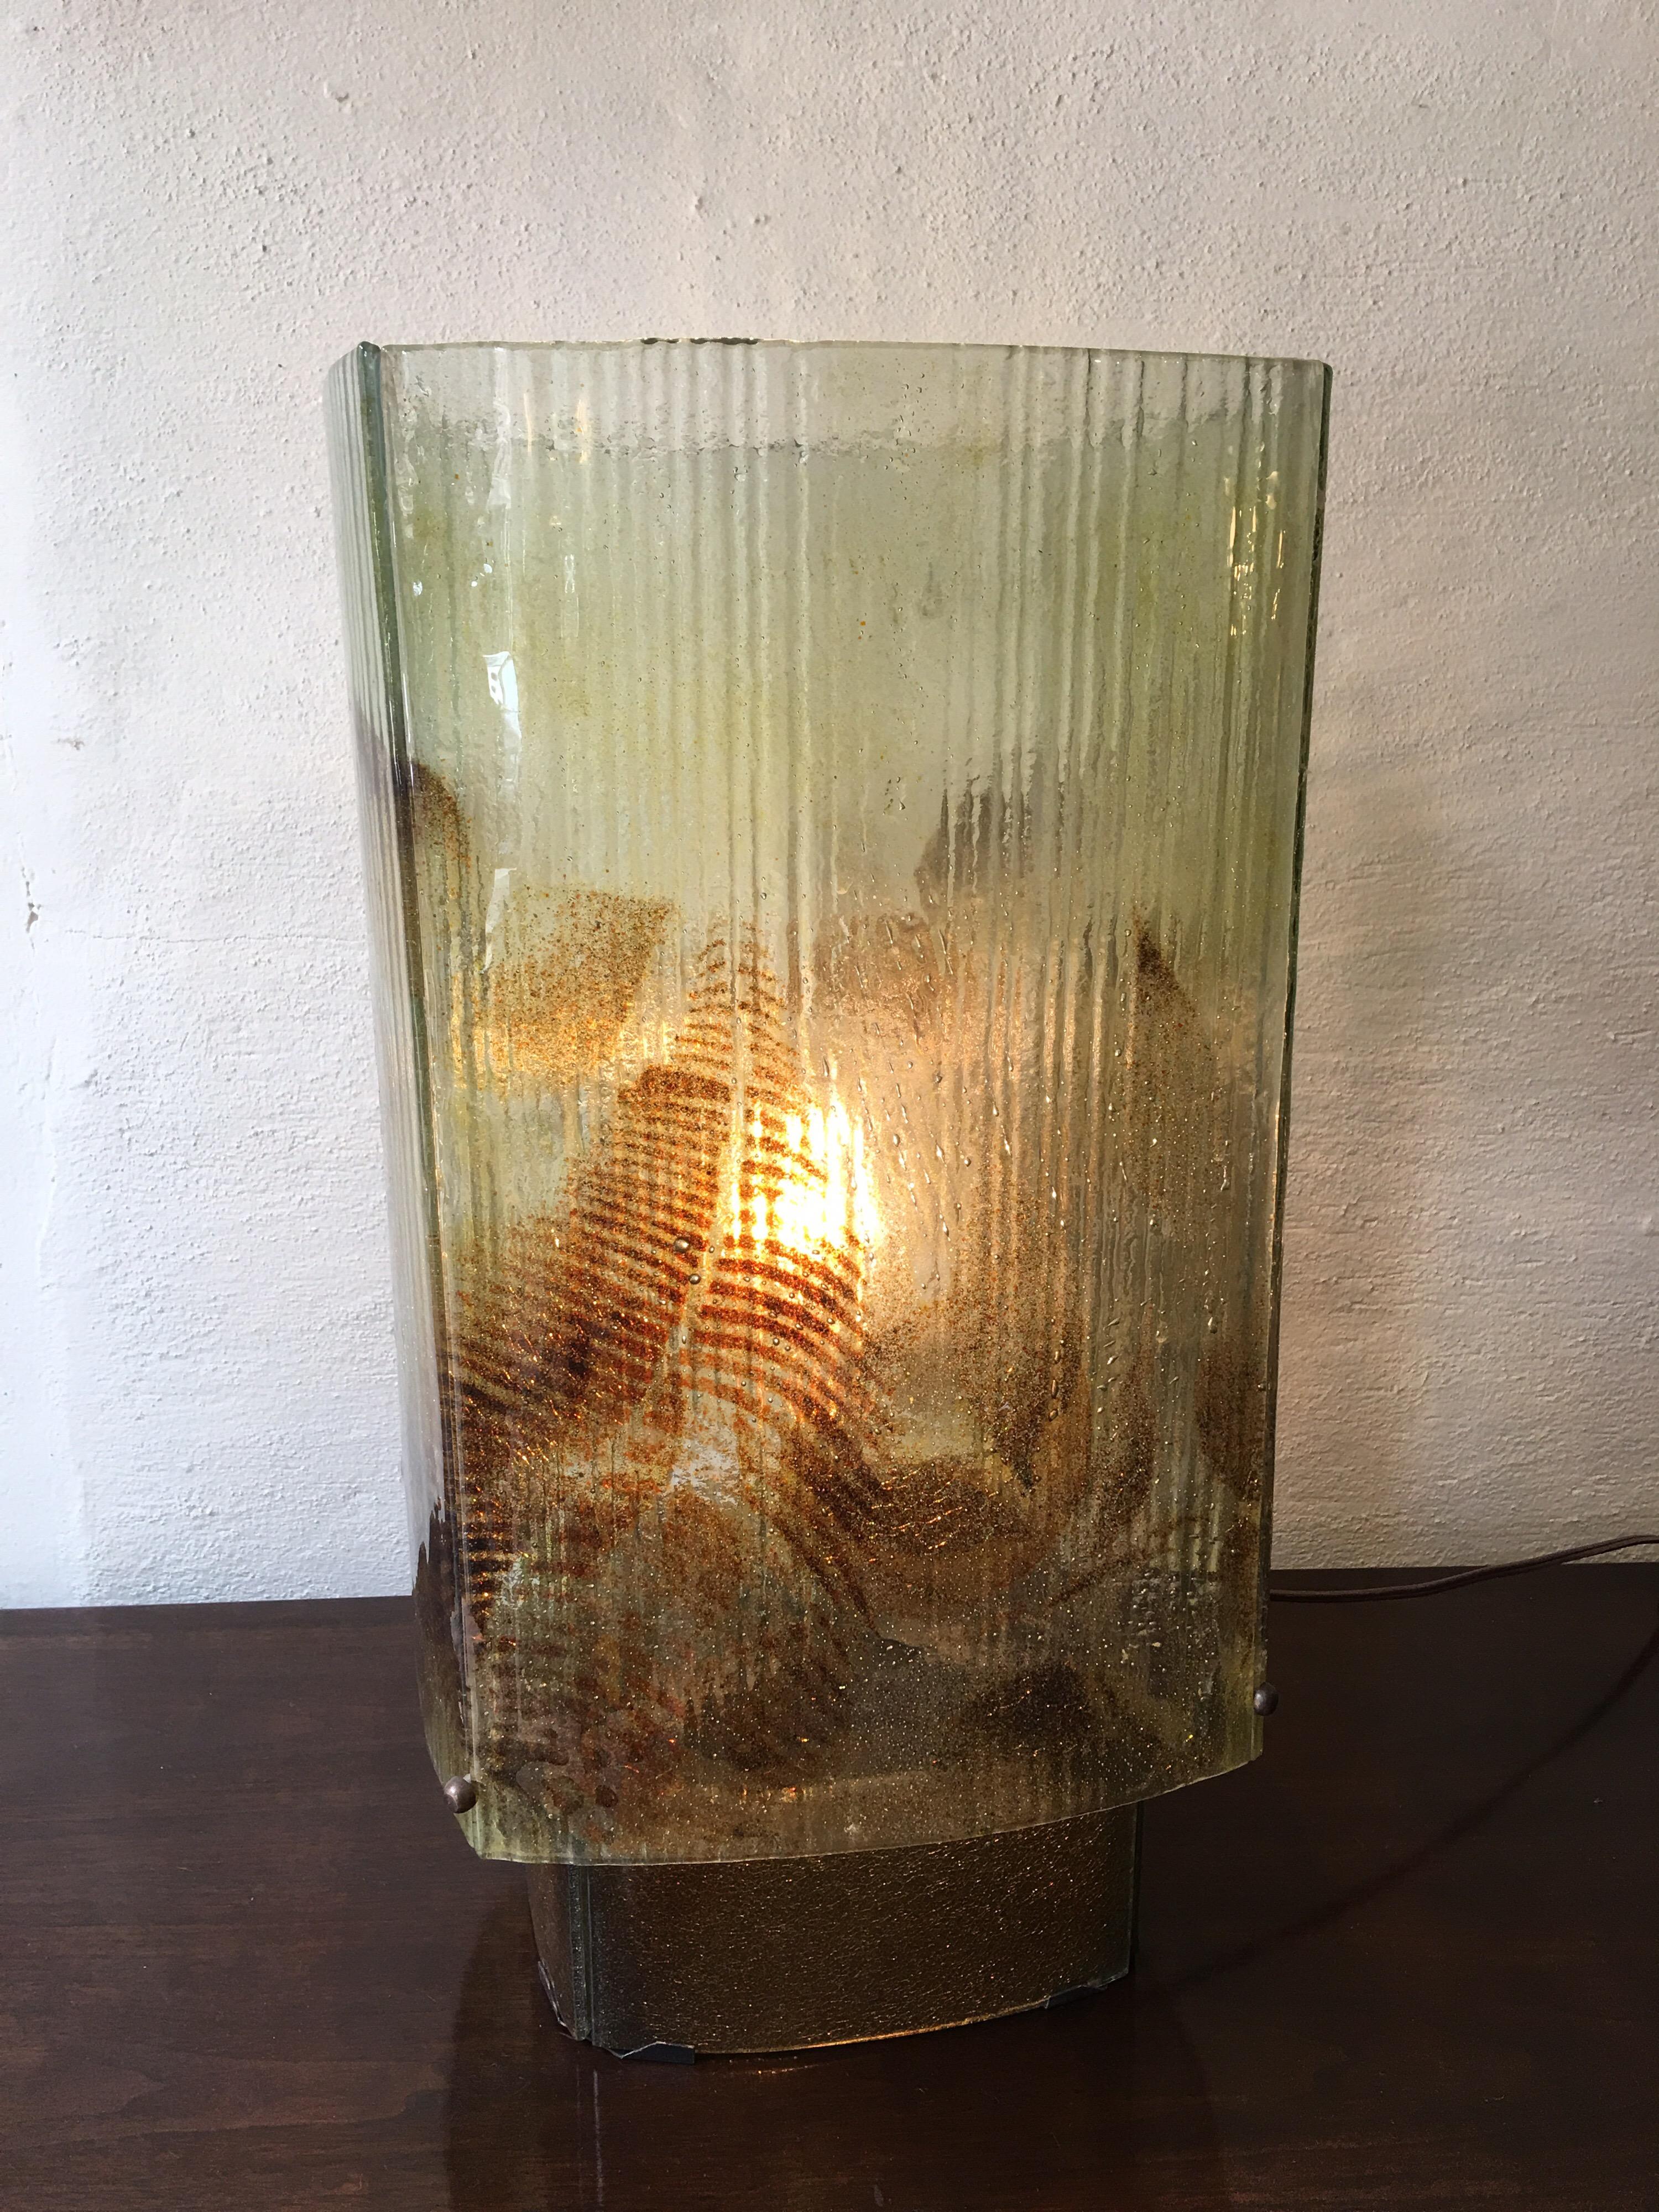 Fused glass table lamp made up of 4 slumped curved panels. Body of lamp is raised on a glass pedestal. We have 4 different models all exhibiting a fauna theme. All have been re-wired and are ready to go! Guessing they might be from the 1970s or